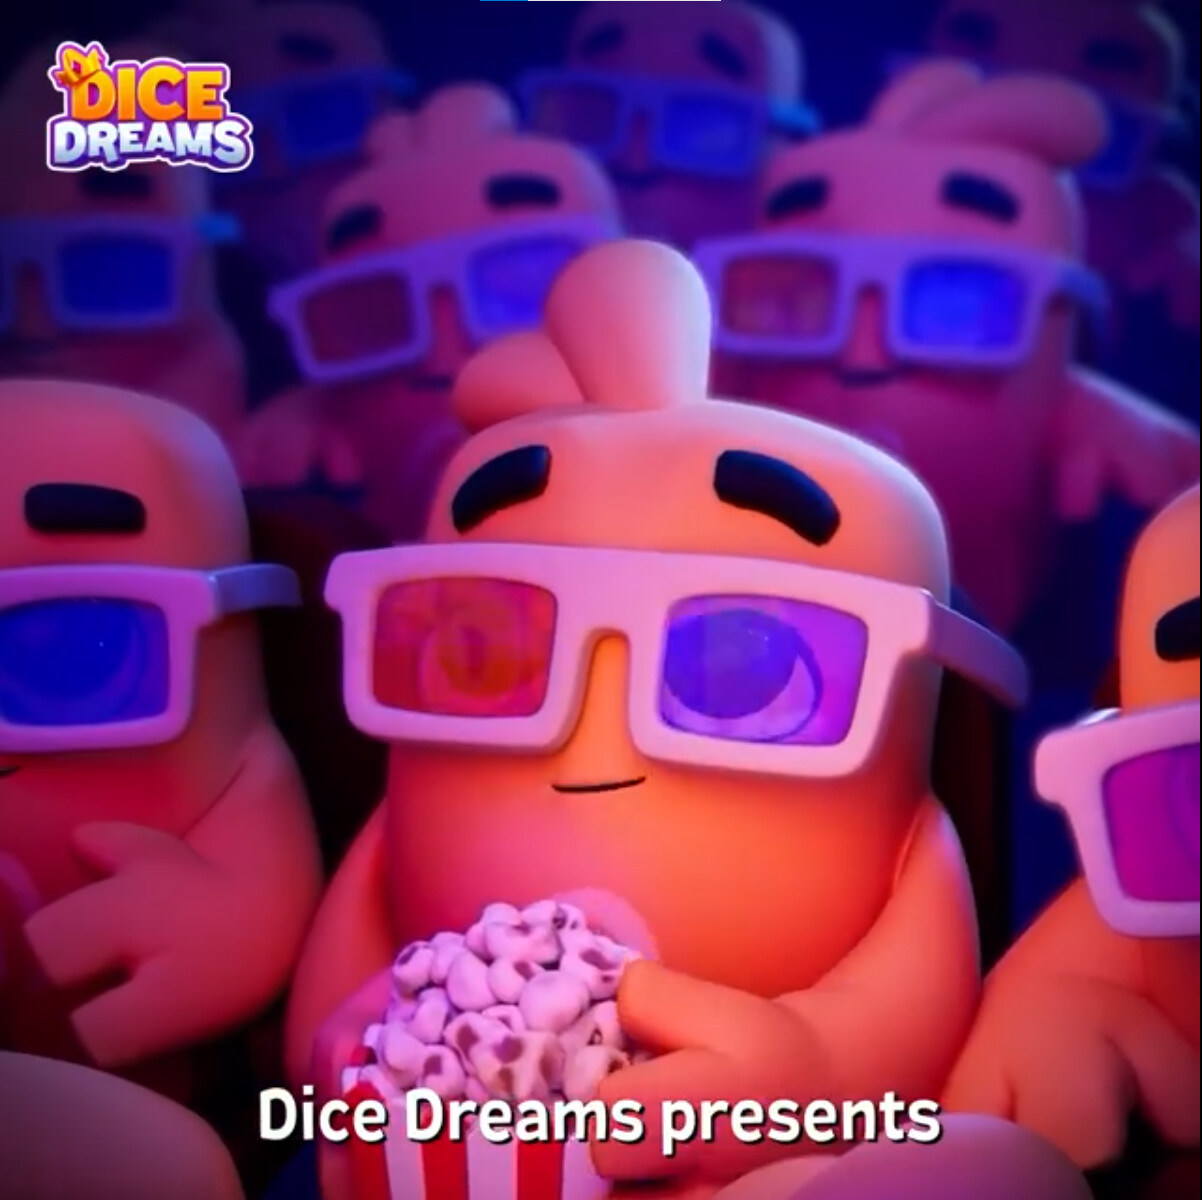 Dice Dreams - The Roll of Fame Album